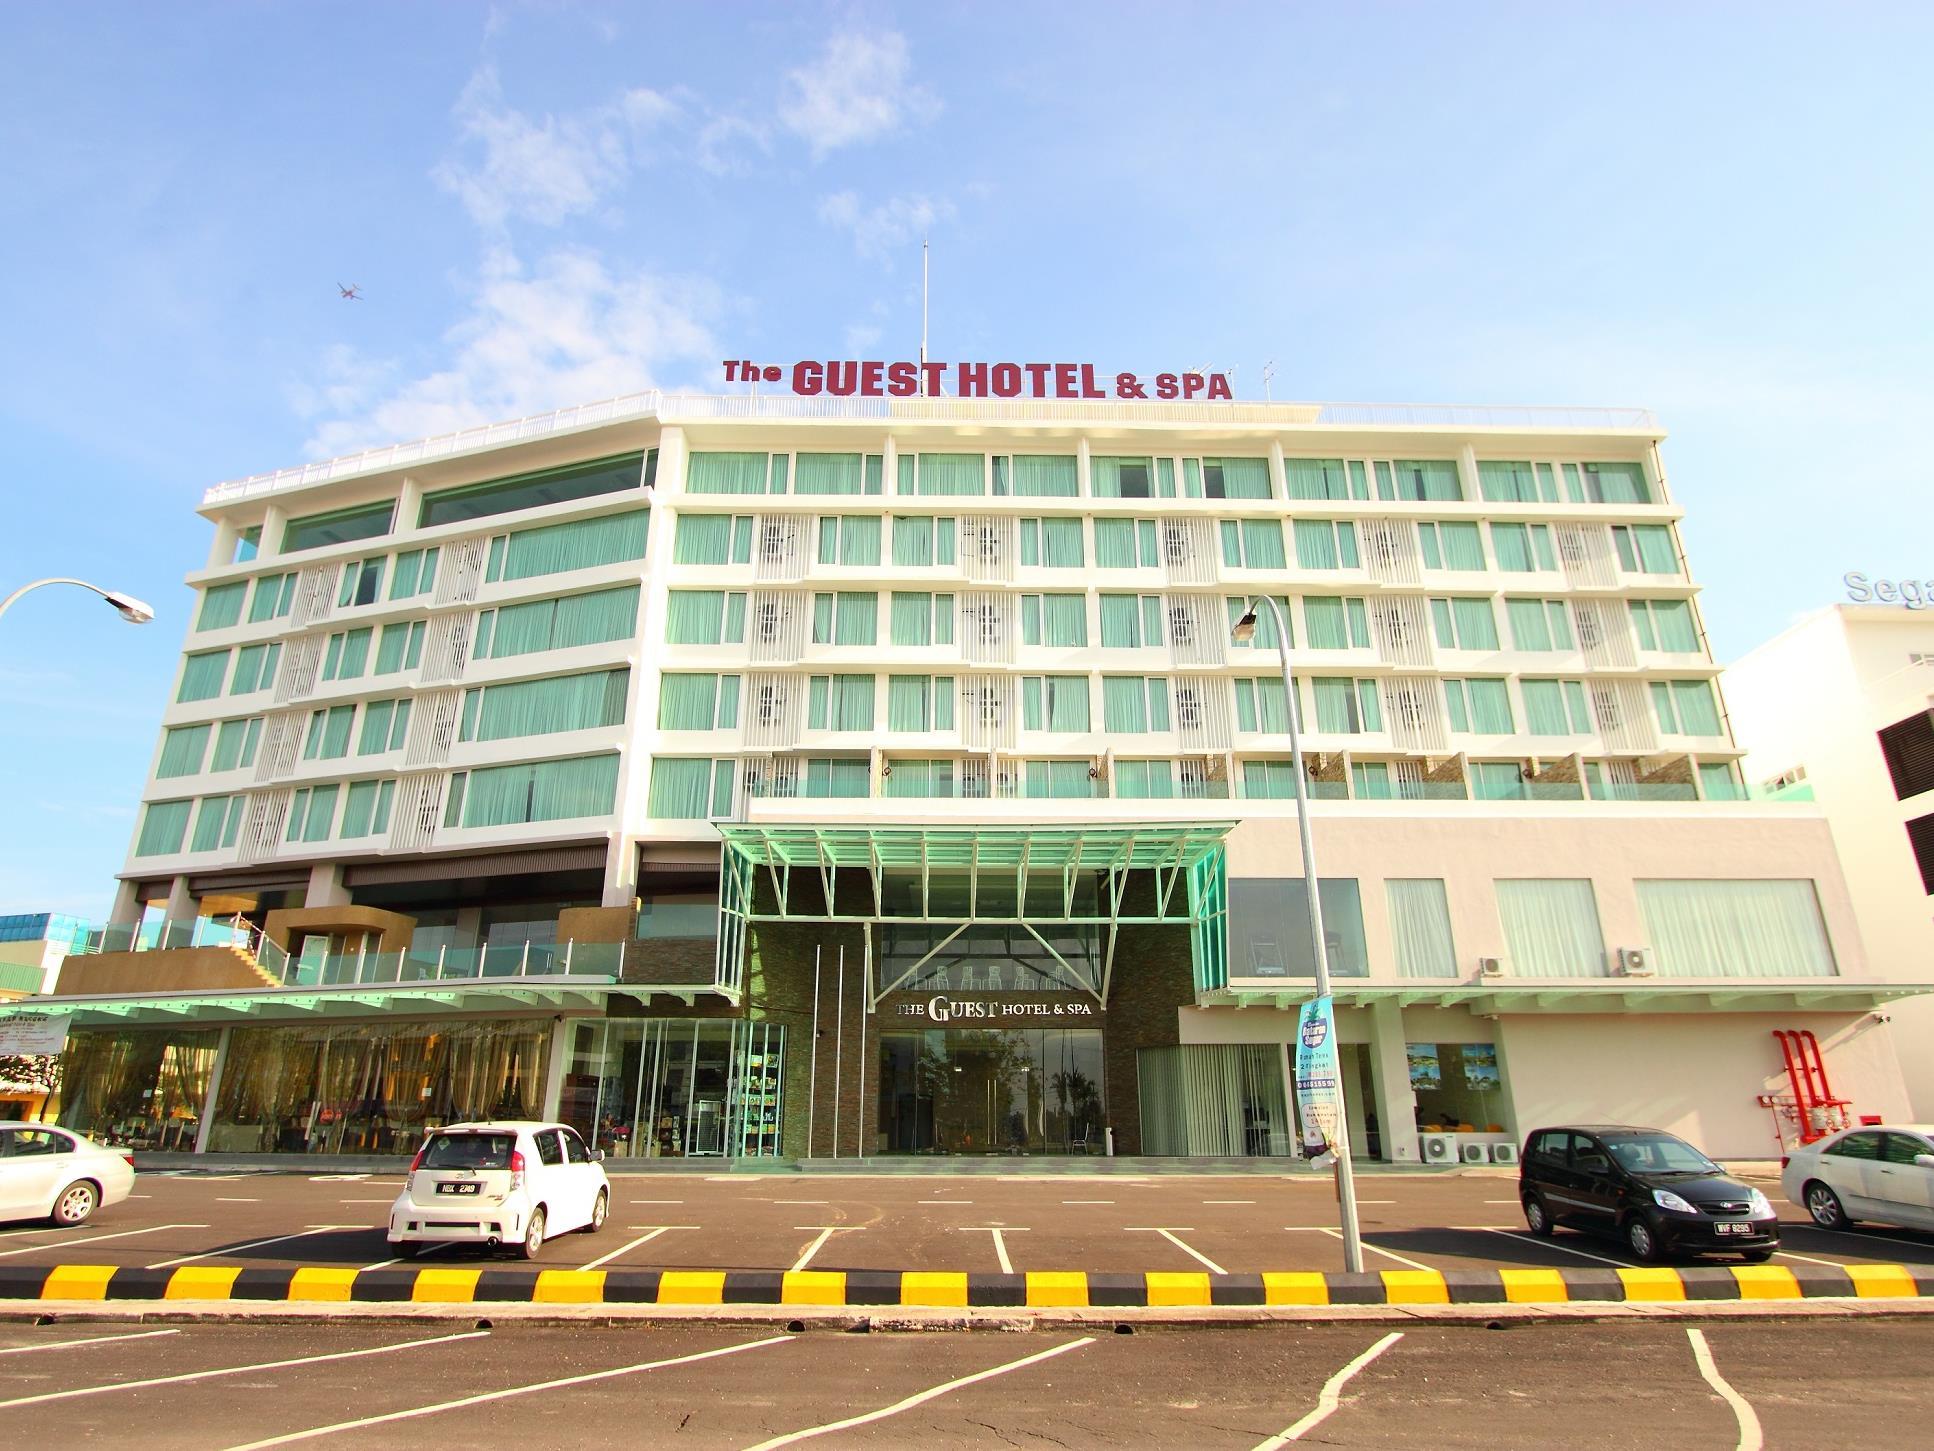 The Guest Hotel & Spa image